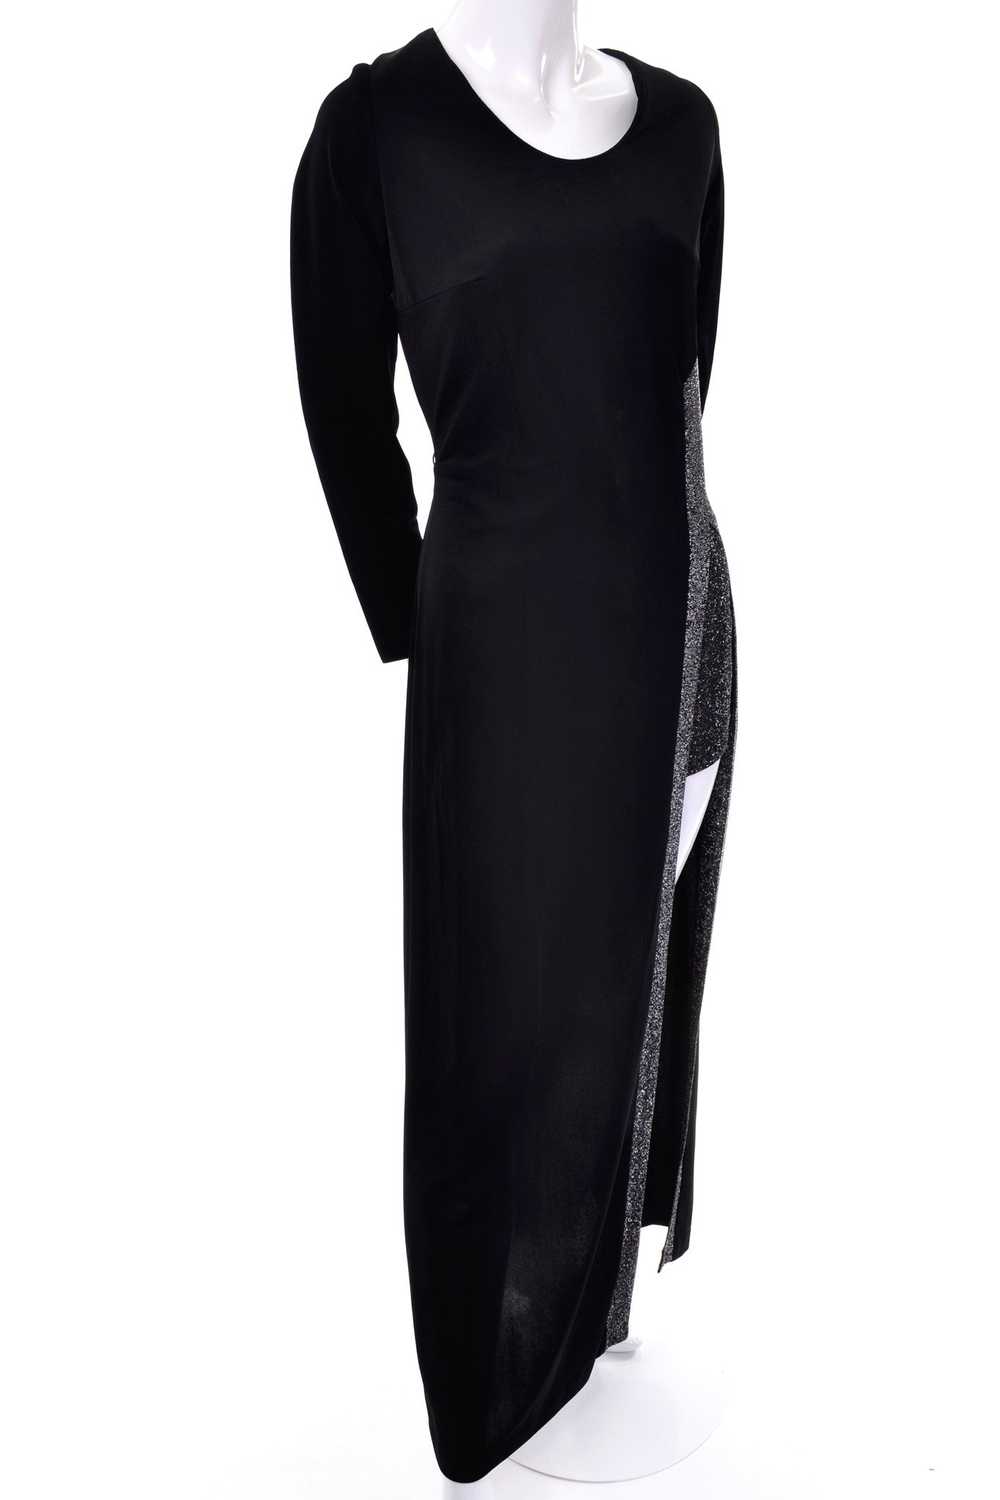 1970's Disco Vintage Black Dress with Slit and Si… - image 3